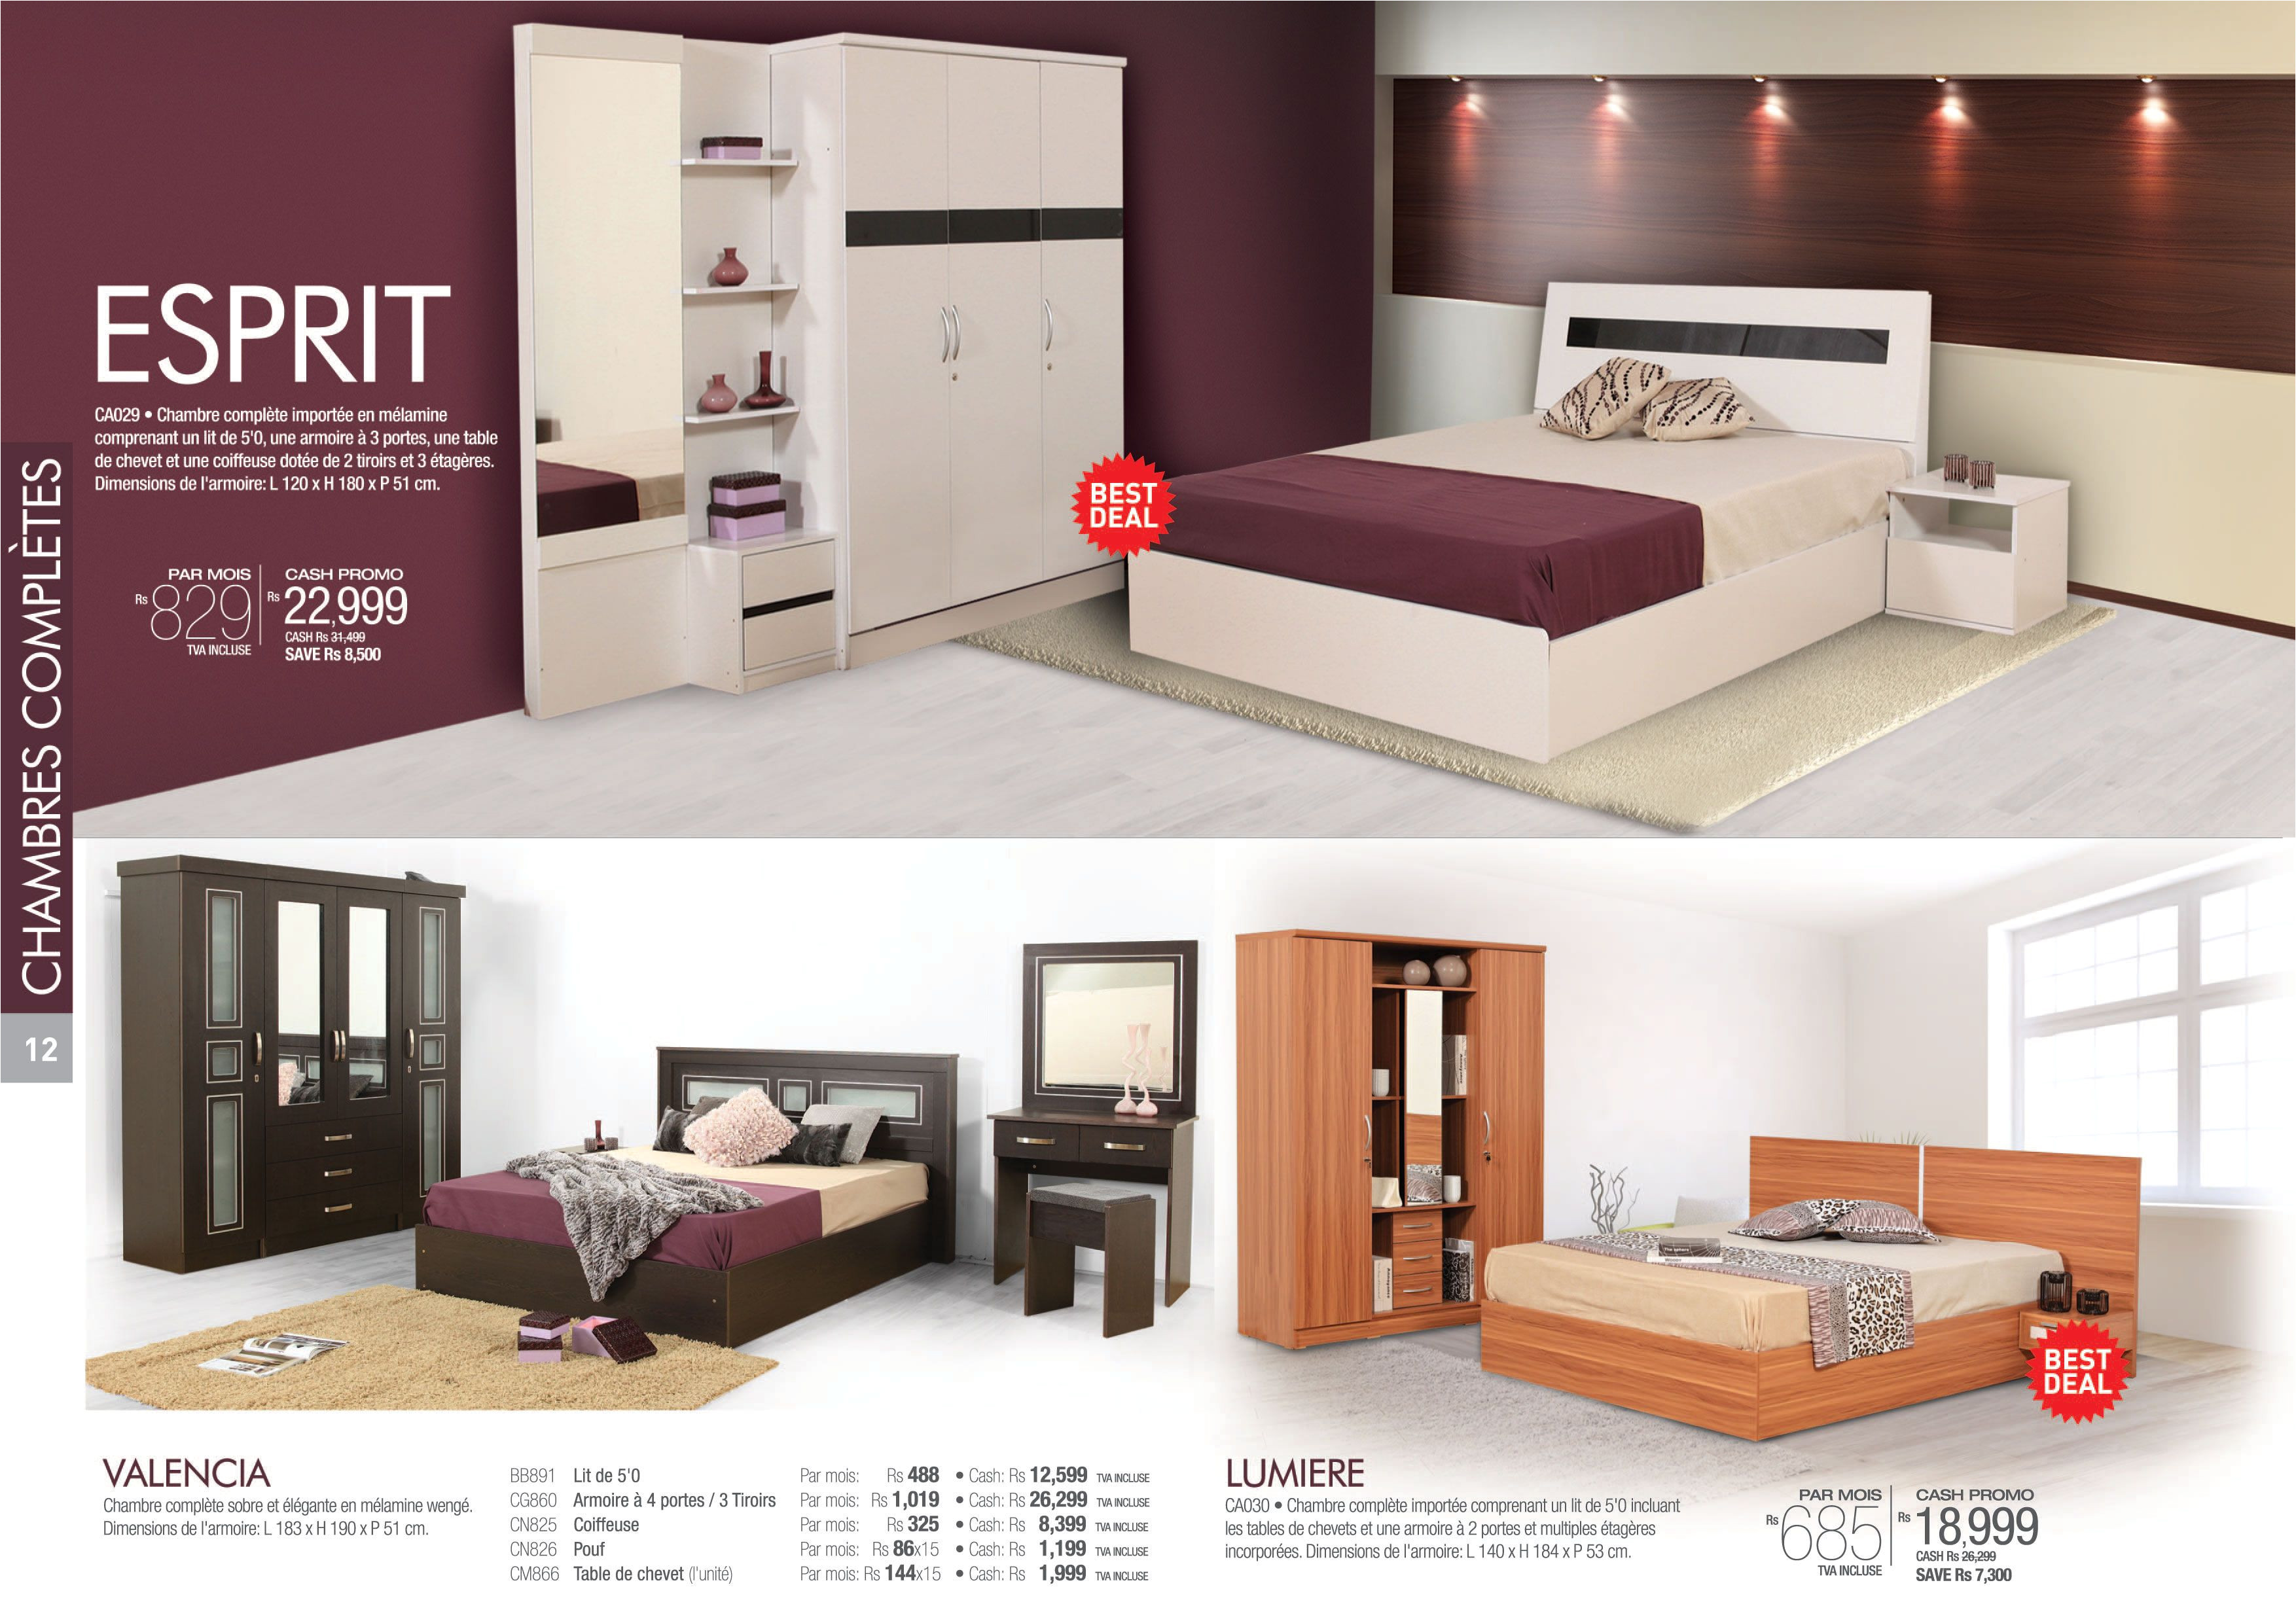 looking some eye catching and luxurious bedroom furniture